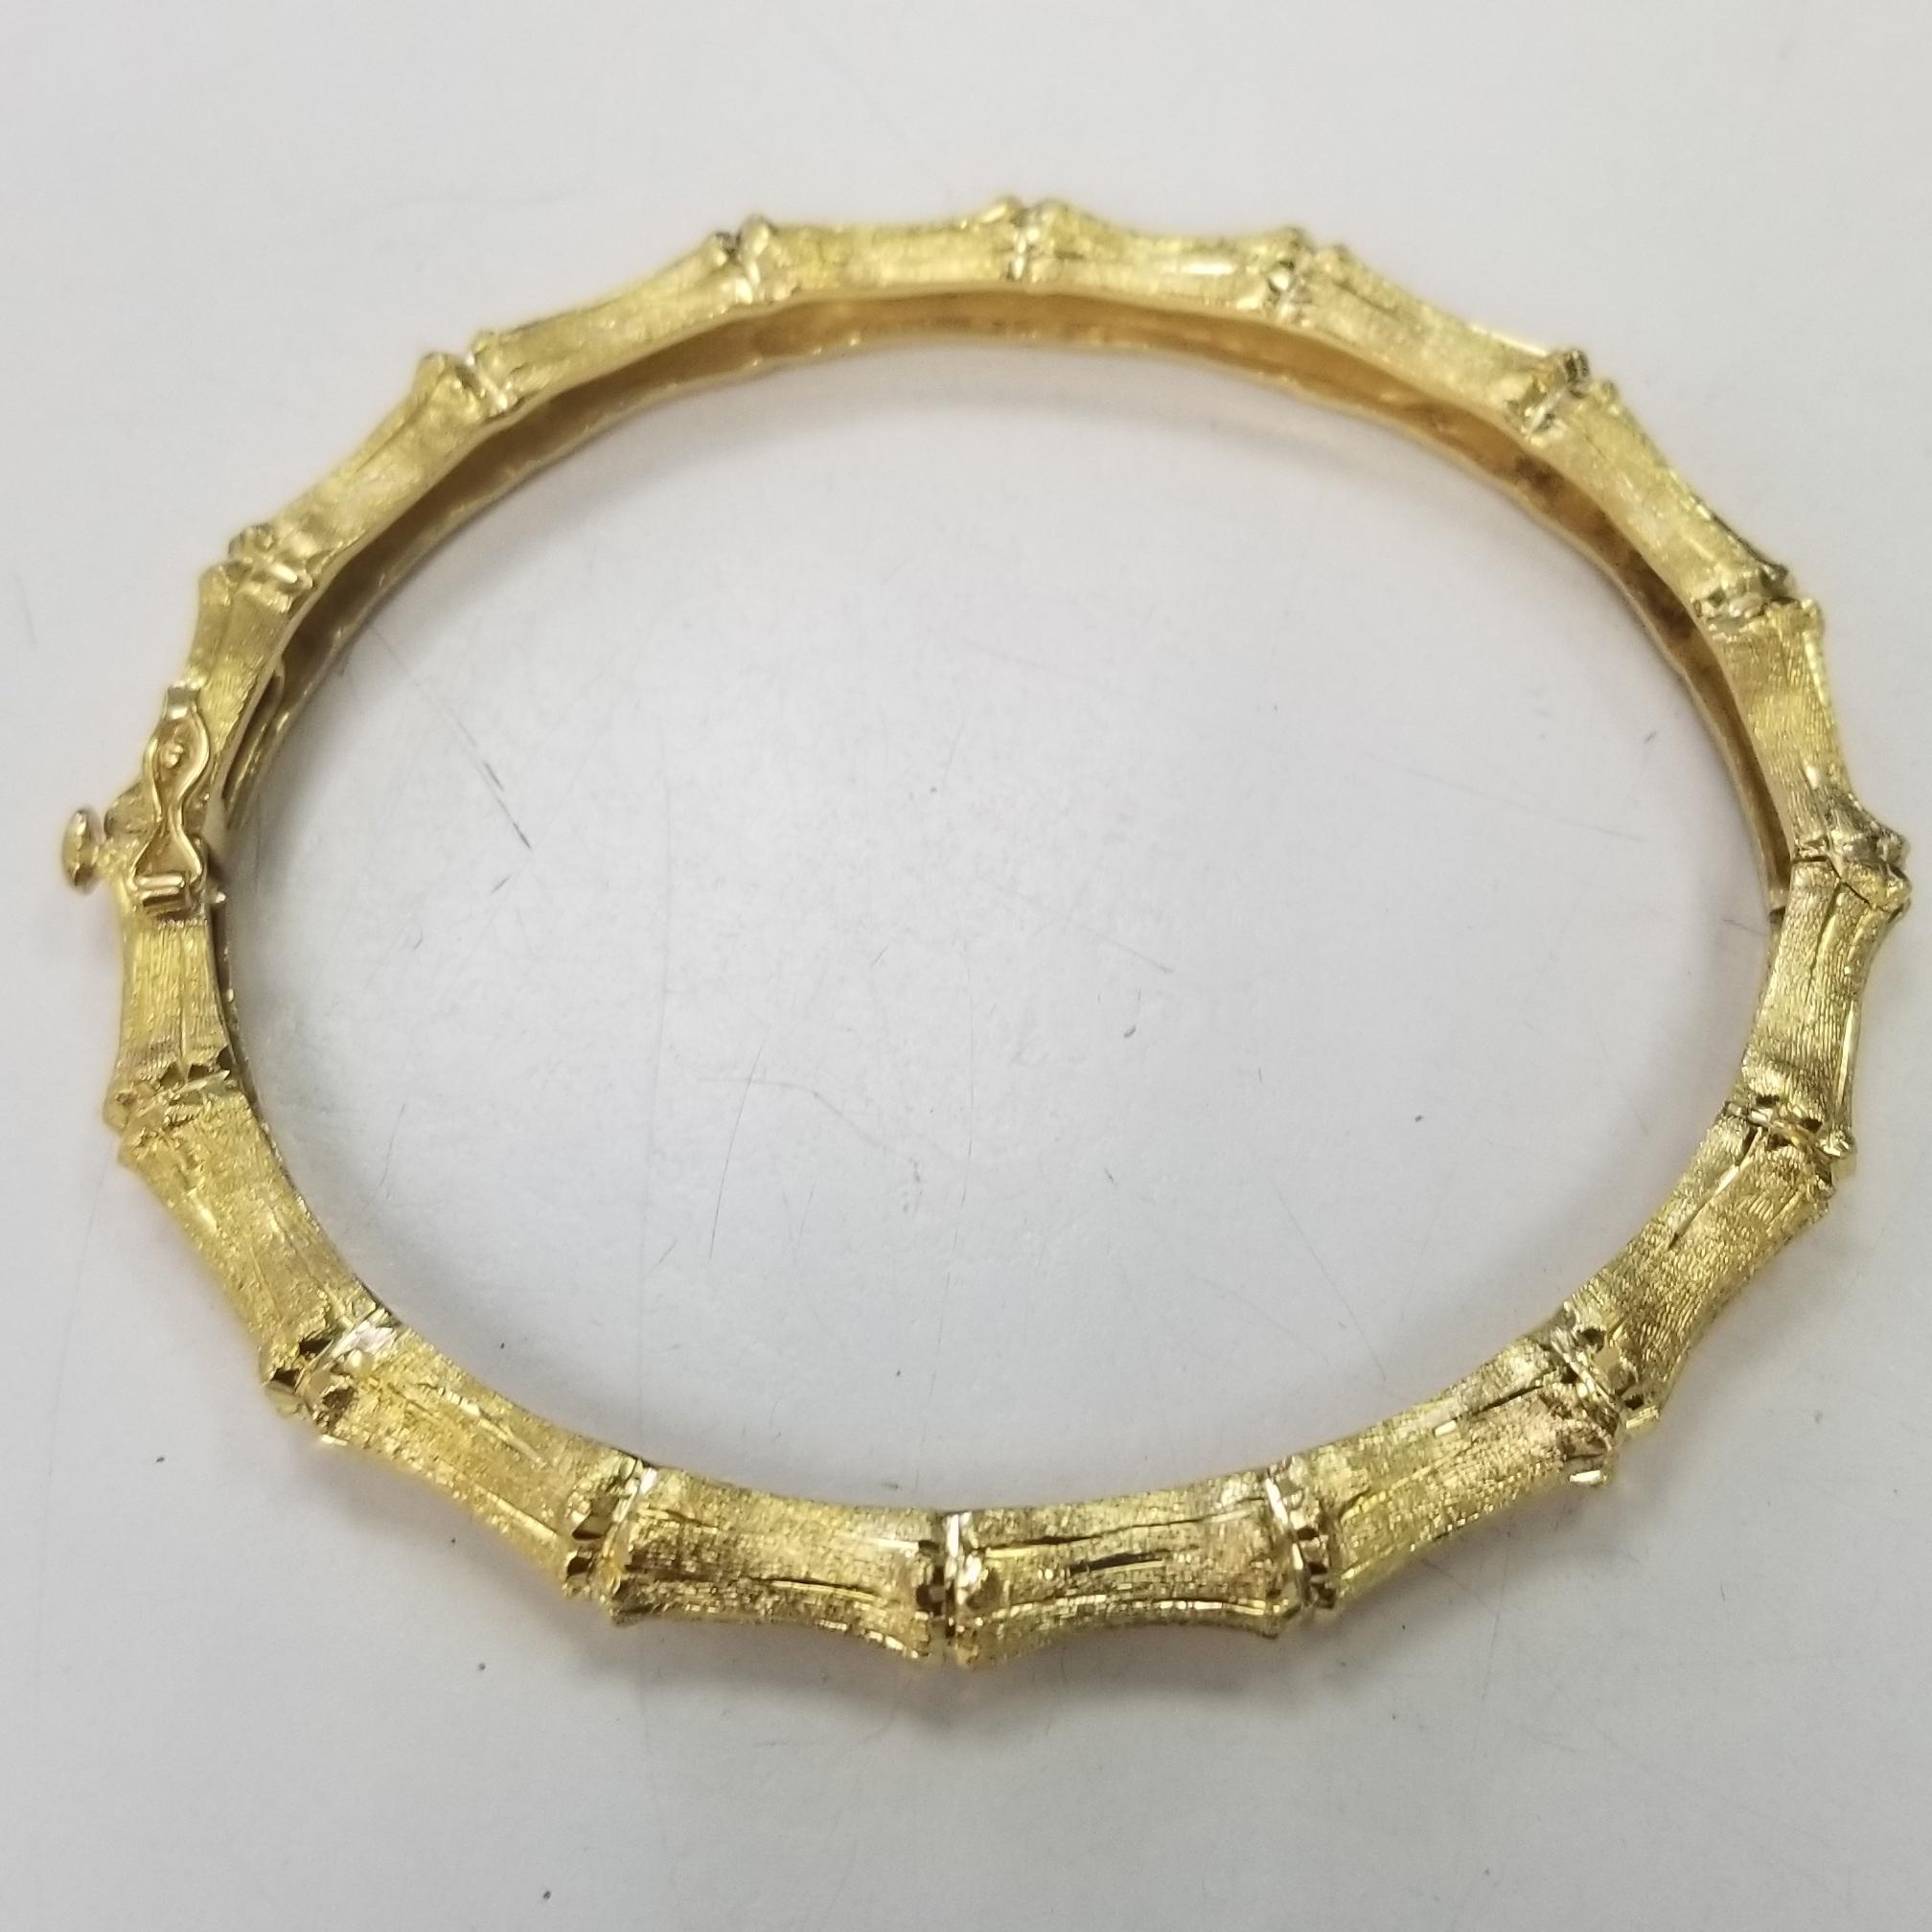 So stylish yet a classic in its own right. This bamboo-style bracelet features the unique design with a hand engraved finish in 18kt yellow gold. A bold look and a comfortable feel, you'll wear this stacked or alone every day! Hinged, 18kt yellow